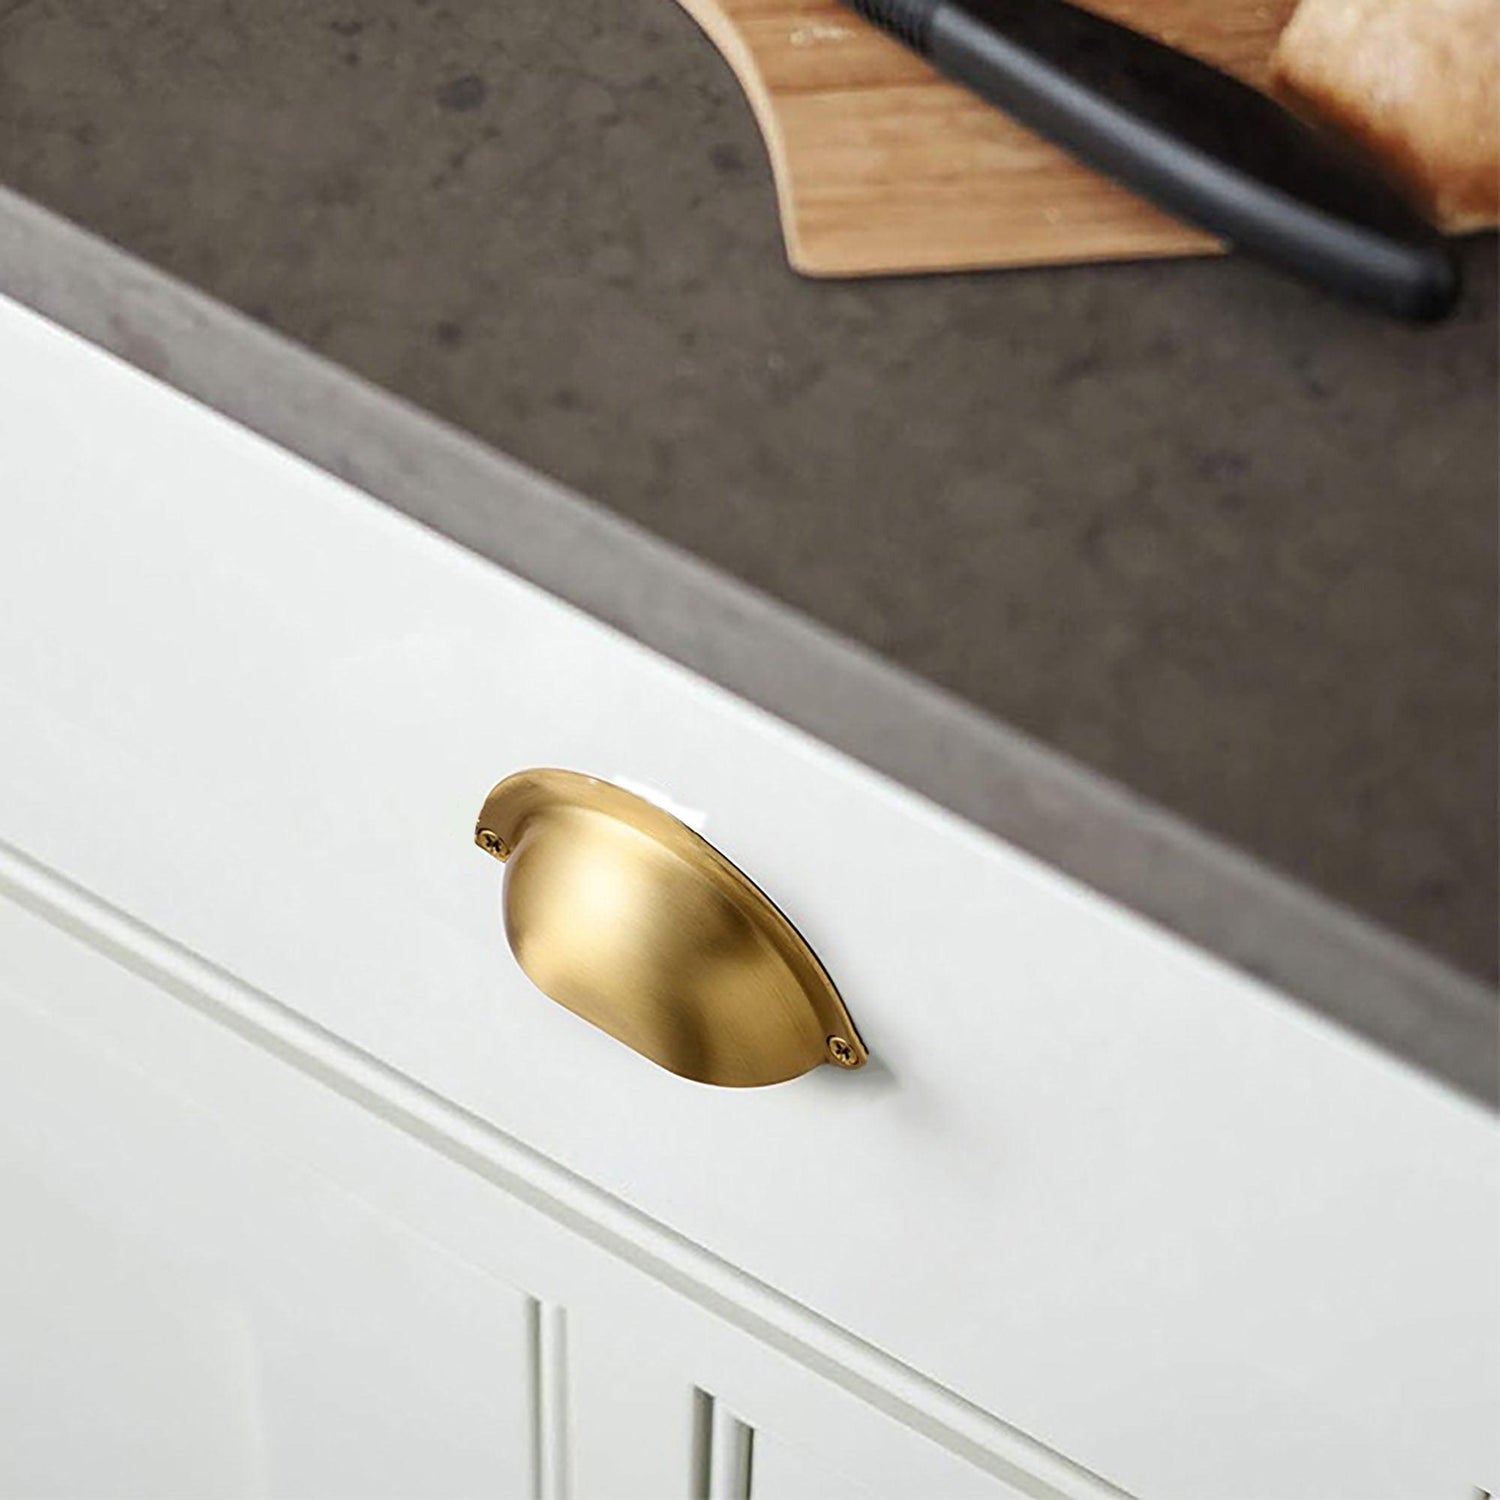 The Gold cup design brass knob fitting complements the white drawer background with its elegant and stylish appearance. The cup design adds a unique touch to the knob, creating a visually appealing focal point. The luxurious gold finish enhances its sophistication, making it an ideal choice for kitchen knobs, drawer knobs, and cabinet knobs. With its functional and decorative qualities, this brass knob effortlessly combines style and practicality.